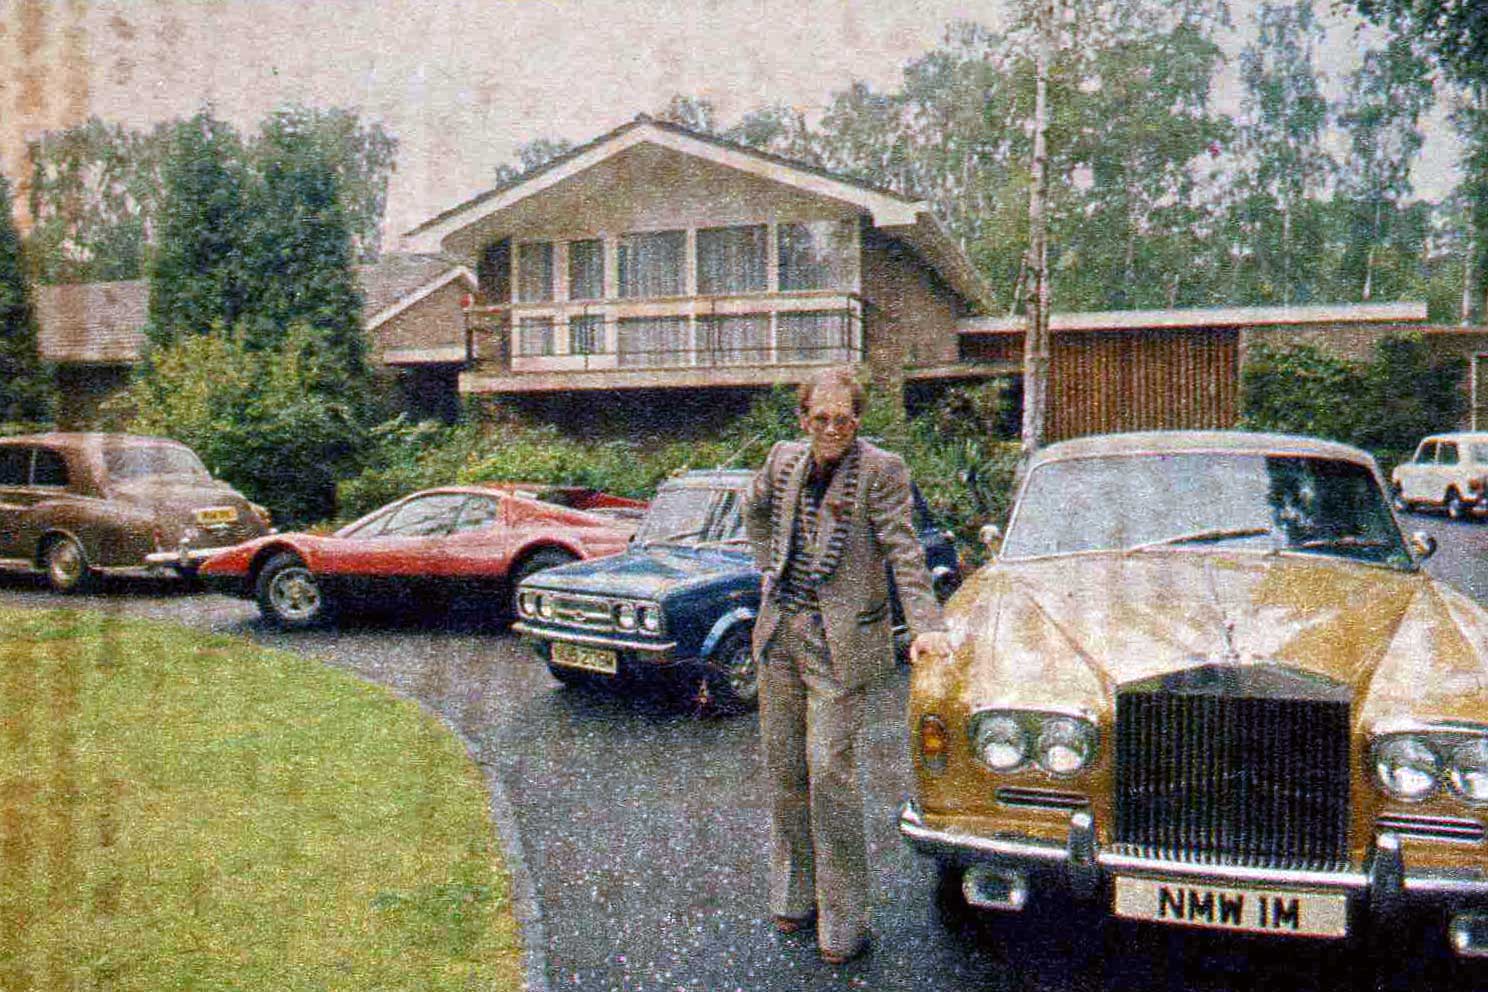 Wood & Pickett Margrave Mini - Elton John - From an article in the &lsquo;Panorama&rsquo; magazine